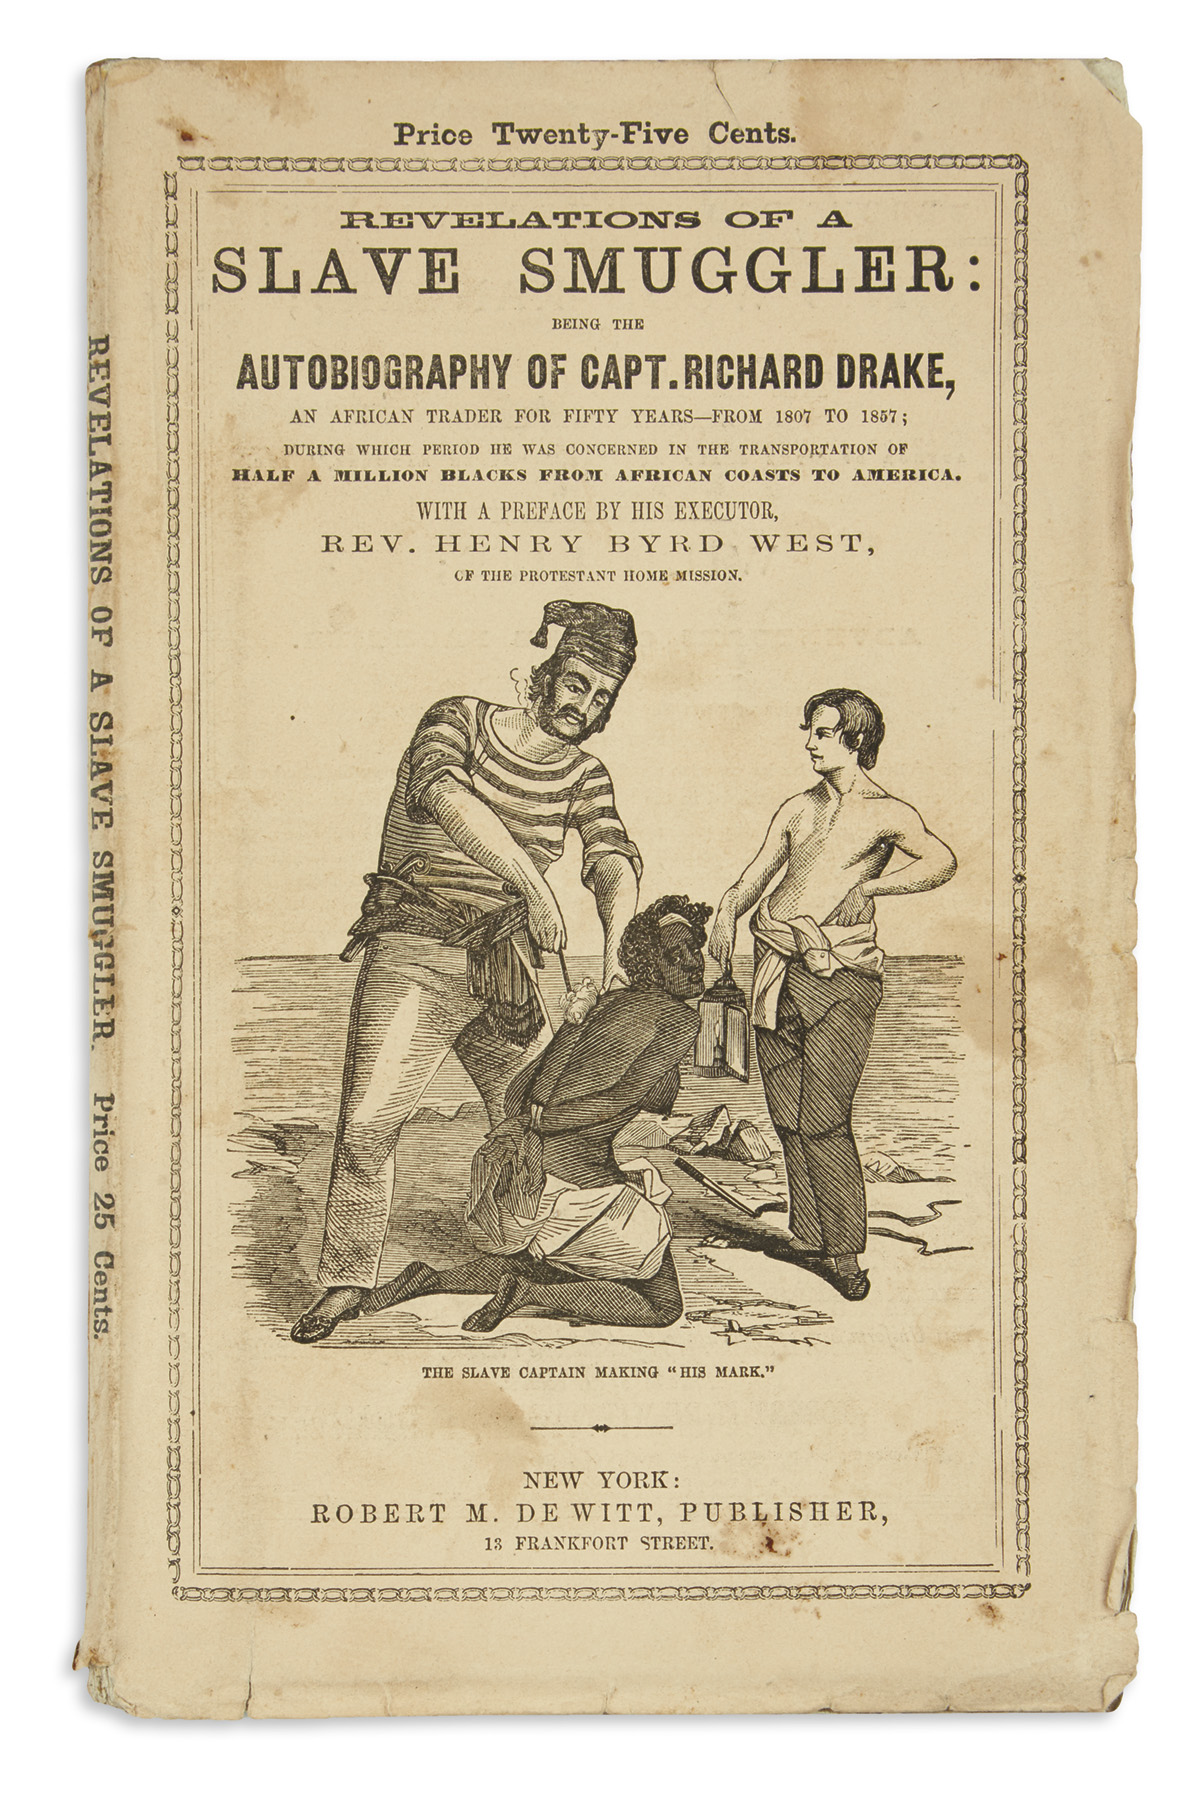 (SLAVERY AND ABOLITION.) Drake, Richard. Revelations of a Slave Smuggler: Being the Autobiography of . . . an African Trader for Fifty